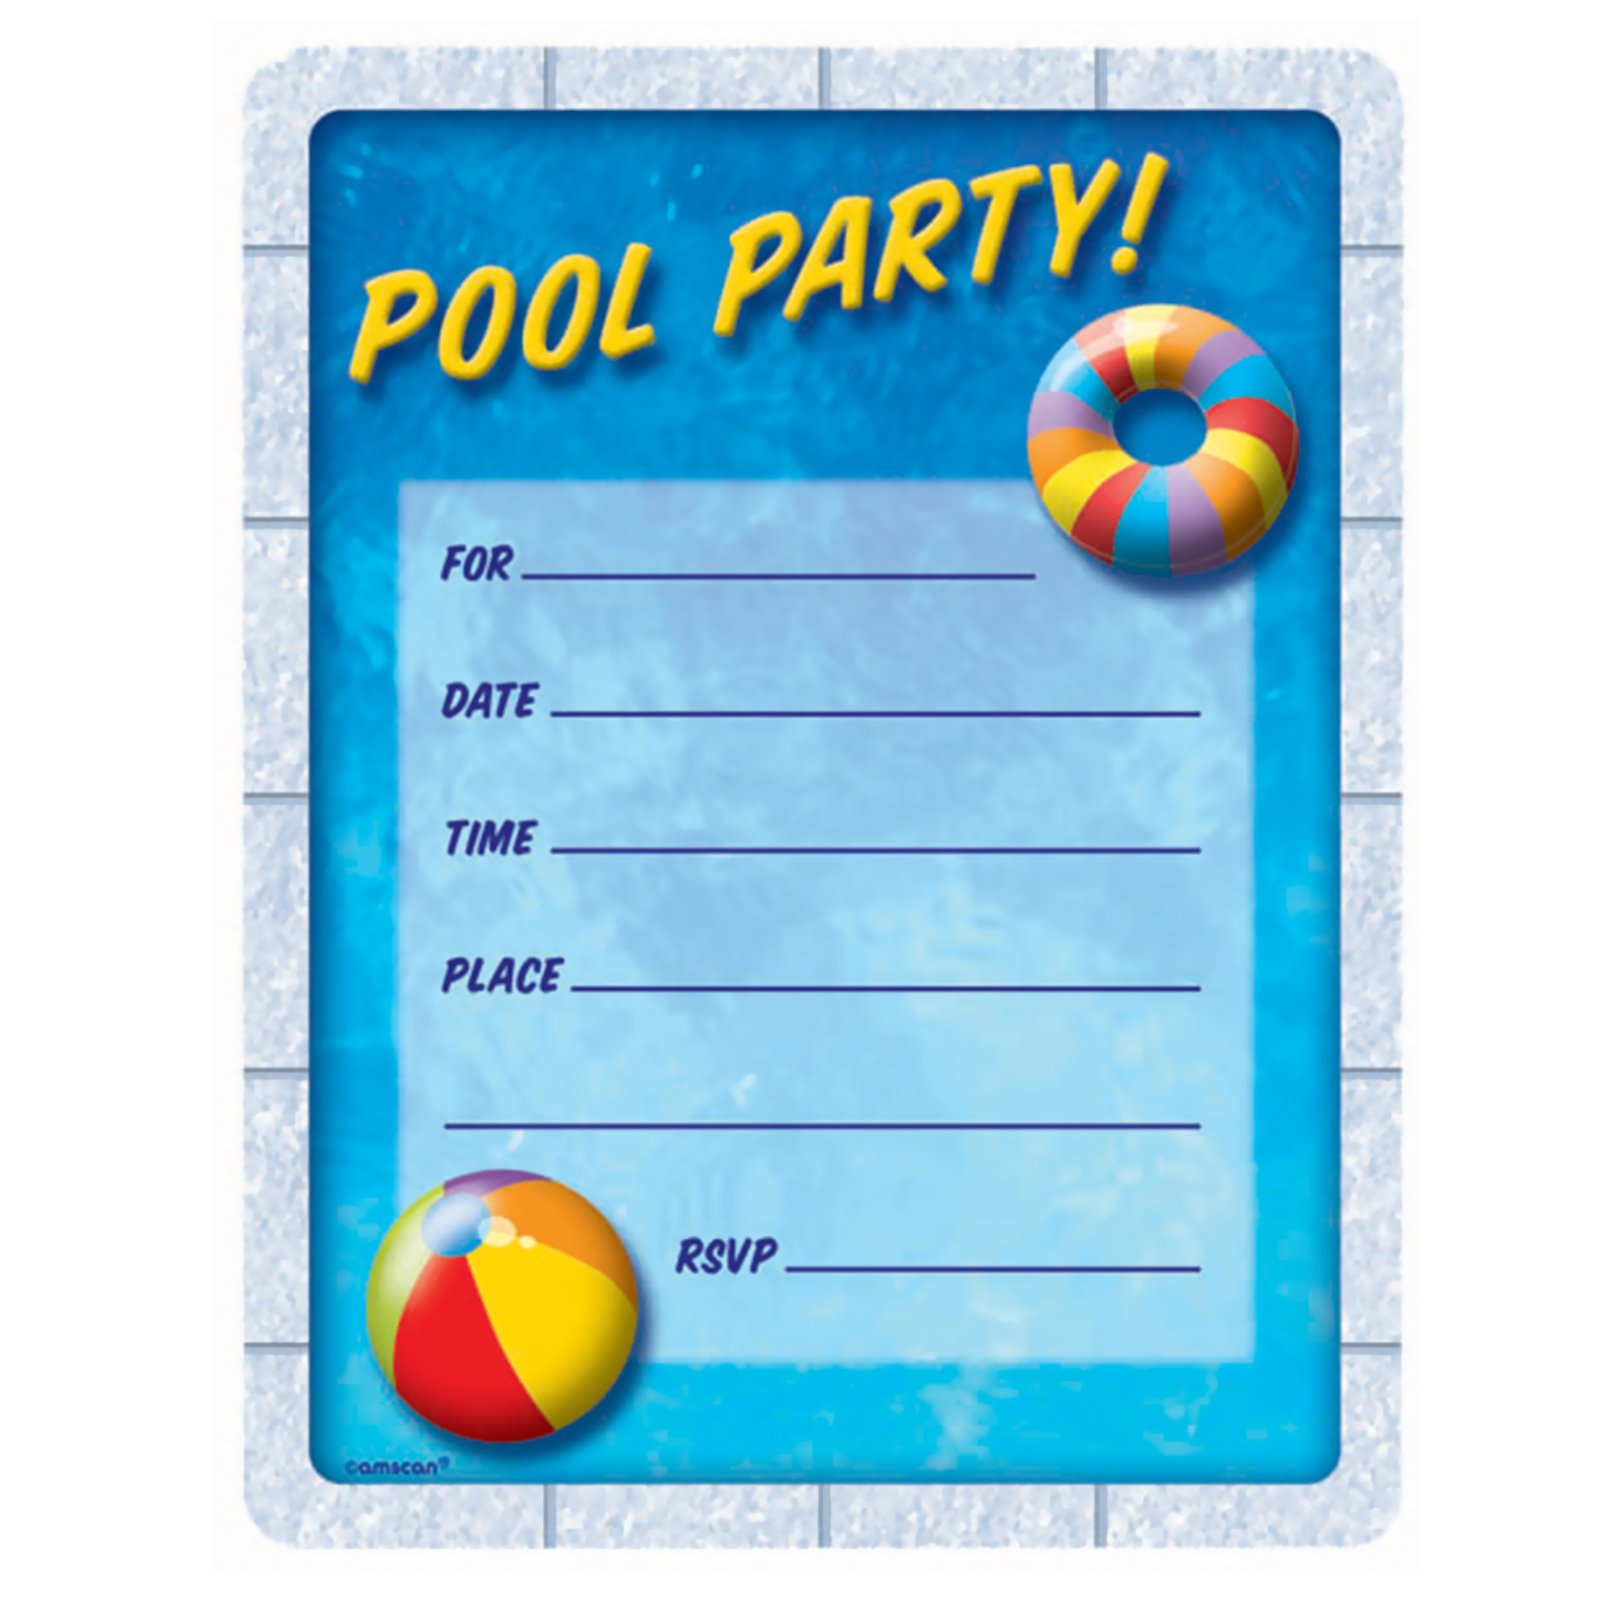 Pool Party - Invitations (50 count)